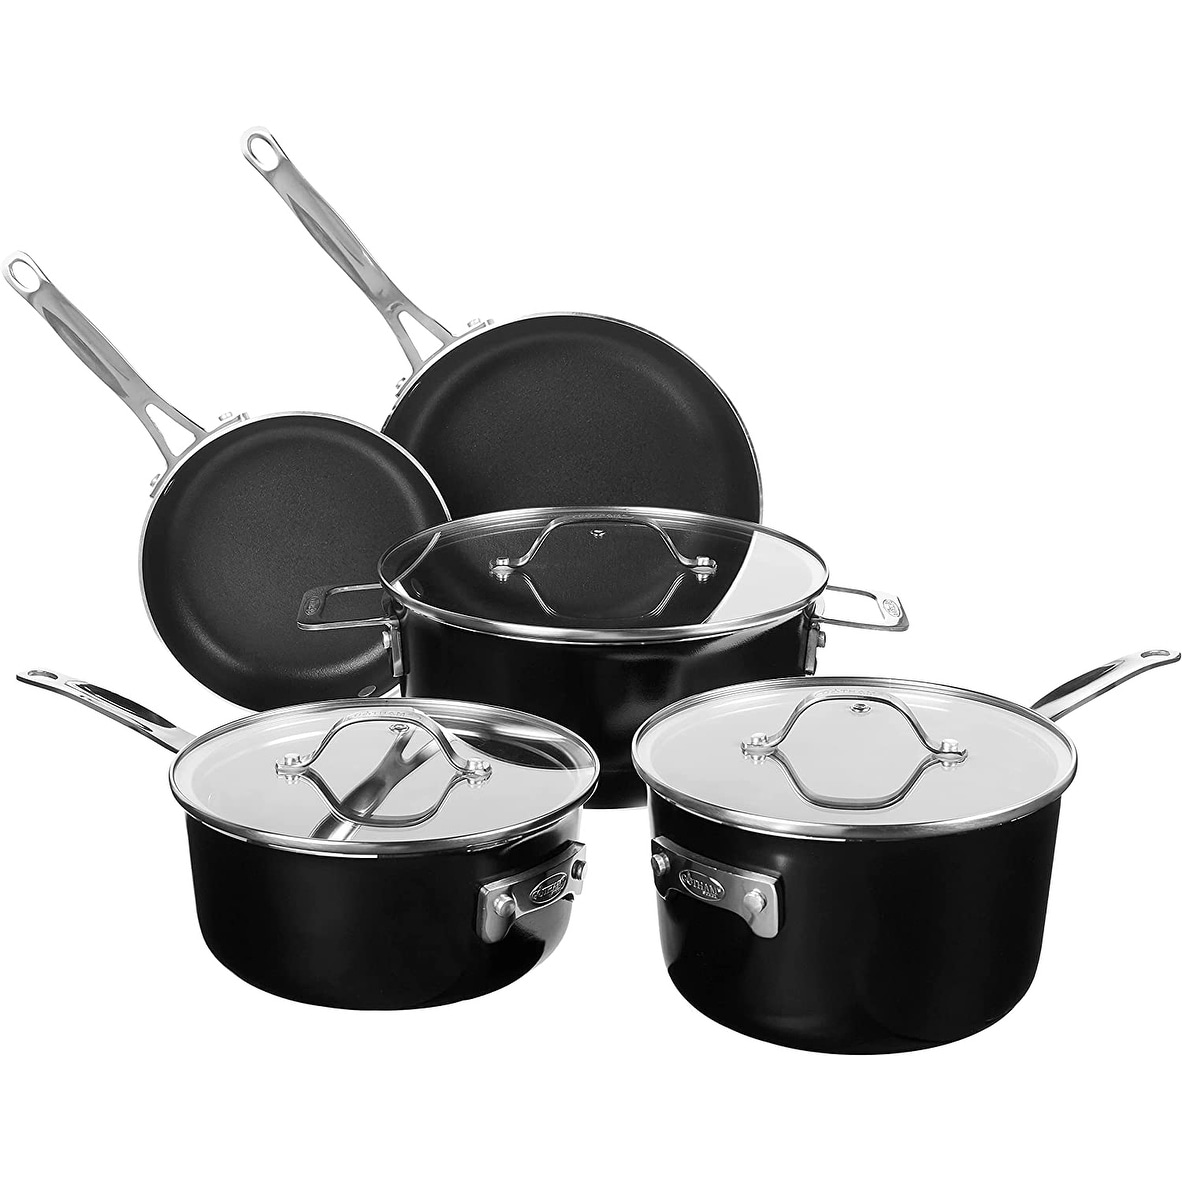 https://ak1.ostkcdn.com/images/products/is/images/direct/a4eae725c251989b0671a50103909d0531cf1a48/Gotham-Steel-Stackable-Pots-and-Pans-Stackmaster-10-Piece-Cookware-Set-with-Ultra-Nonstick-Cast-Texture-Ceramic-Coating%2C-Copper.jpg